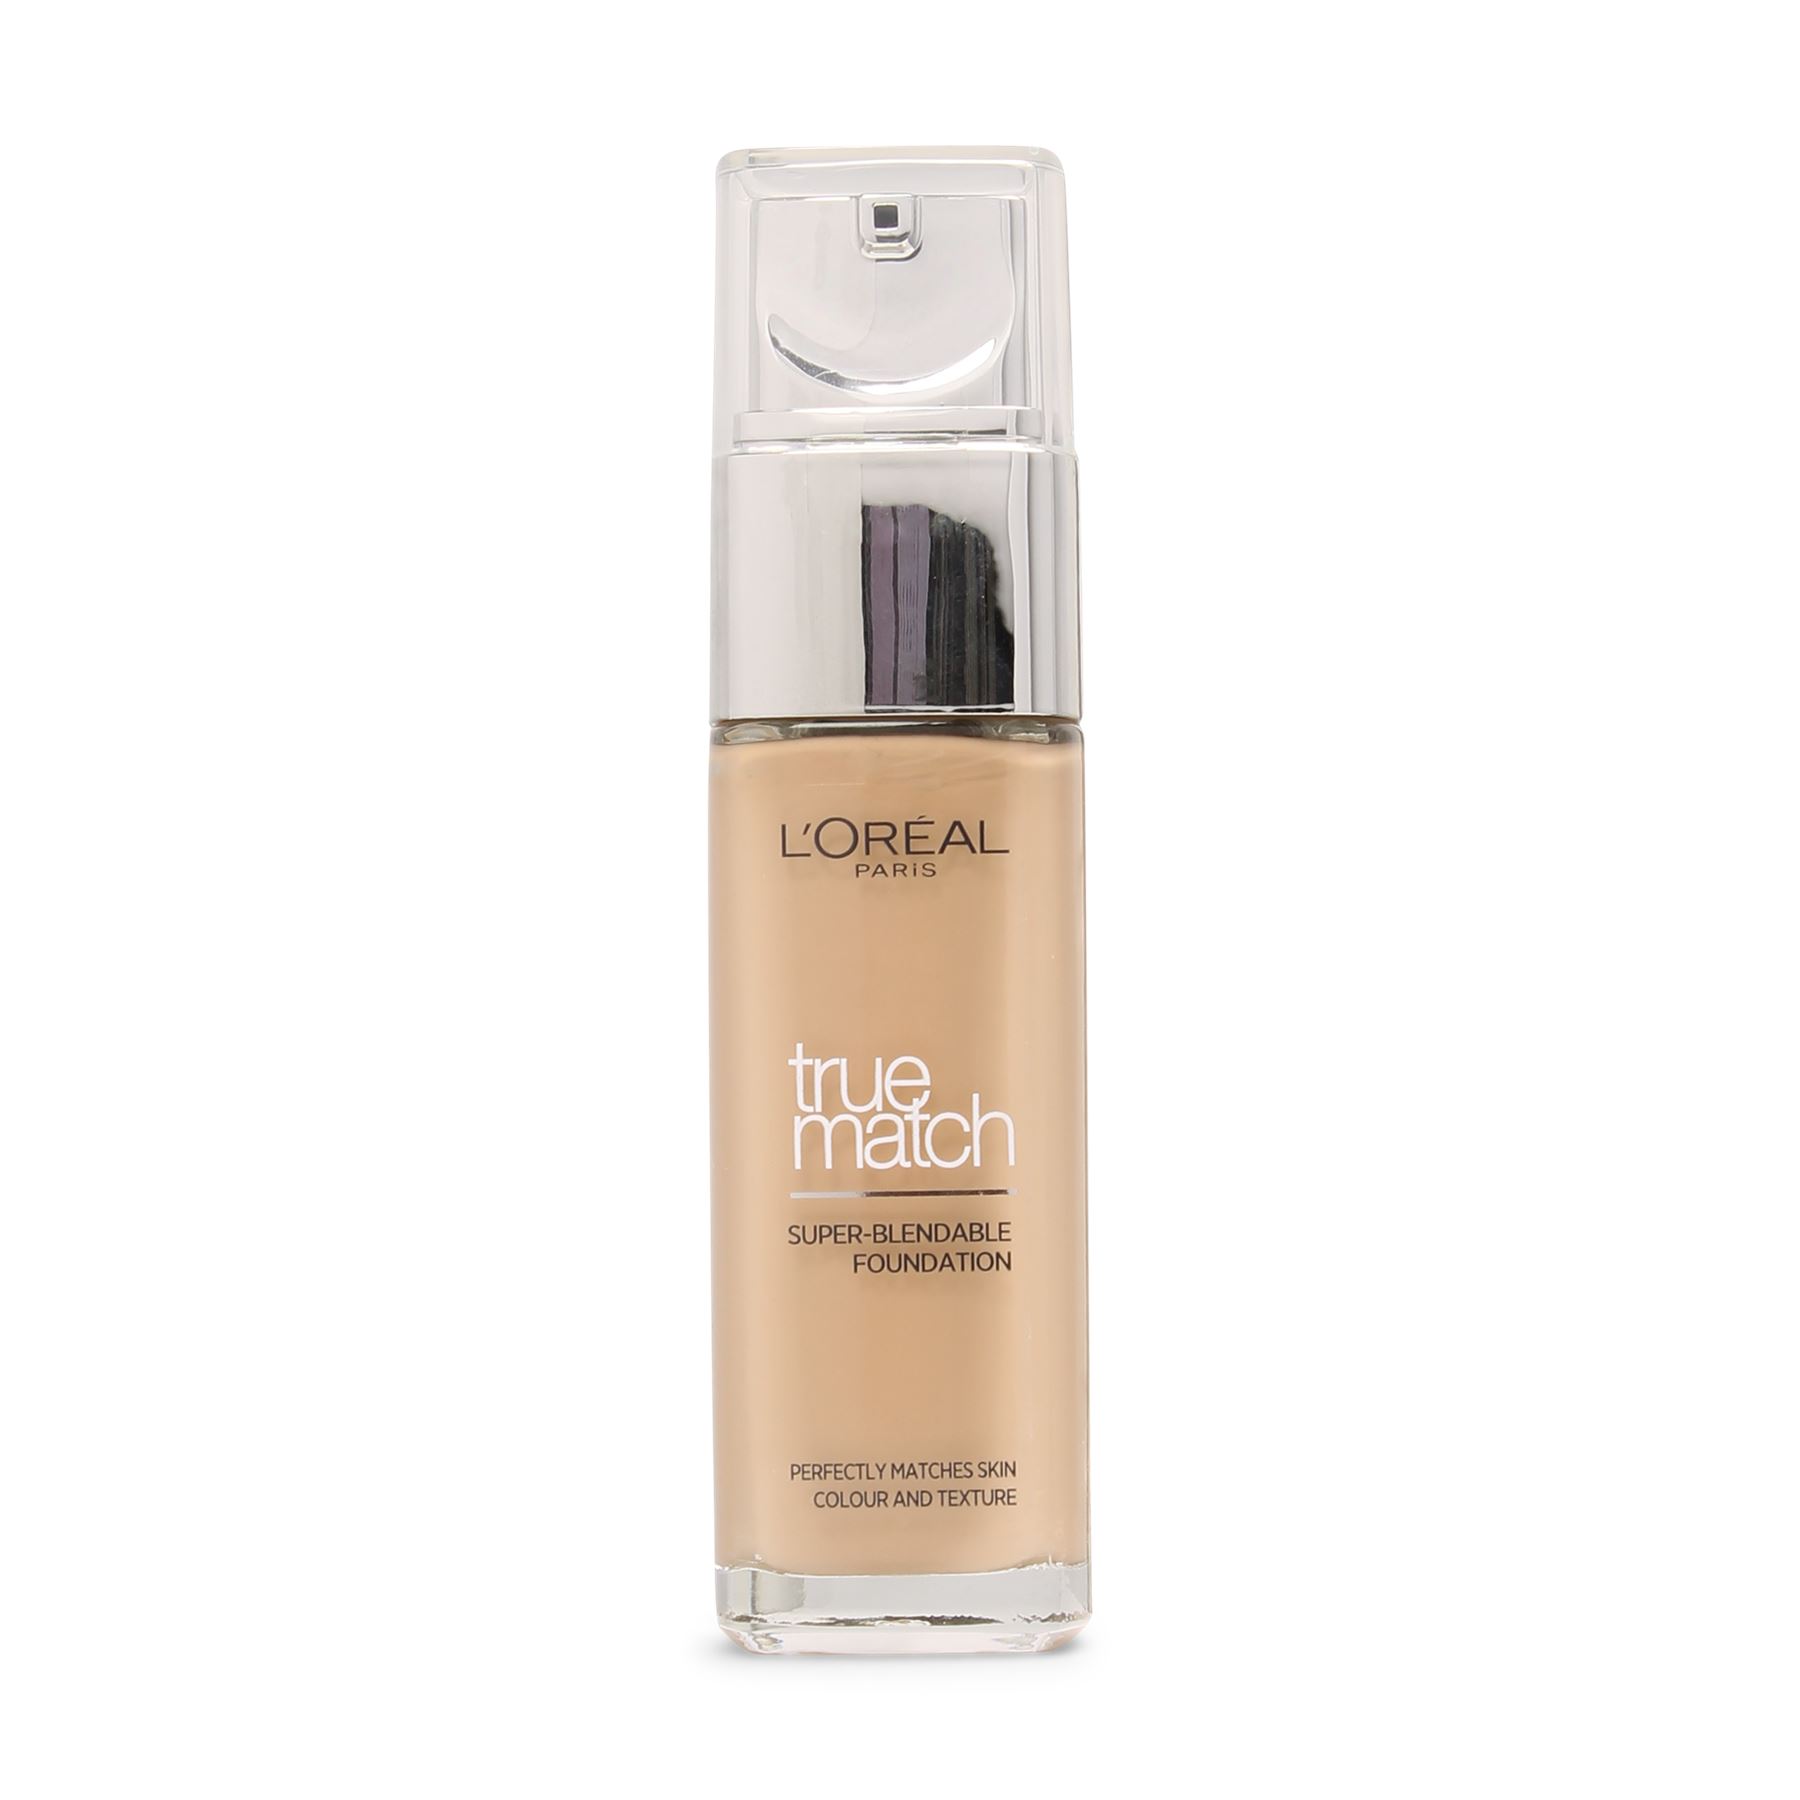 Best of Bulletproof makeup: 8 Water Proof Foundations Perfect for Monsoons